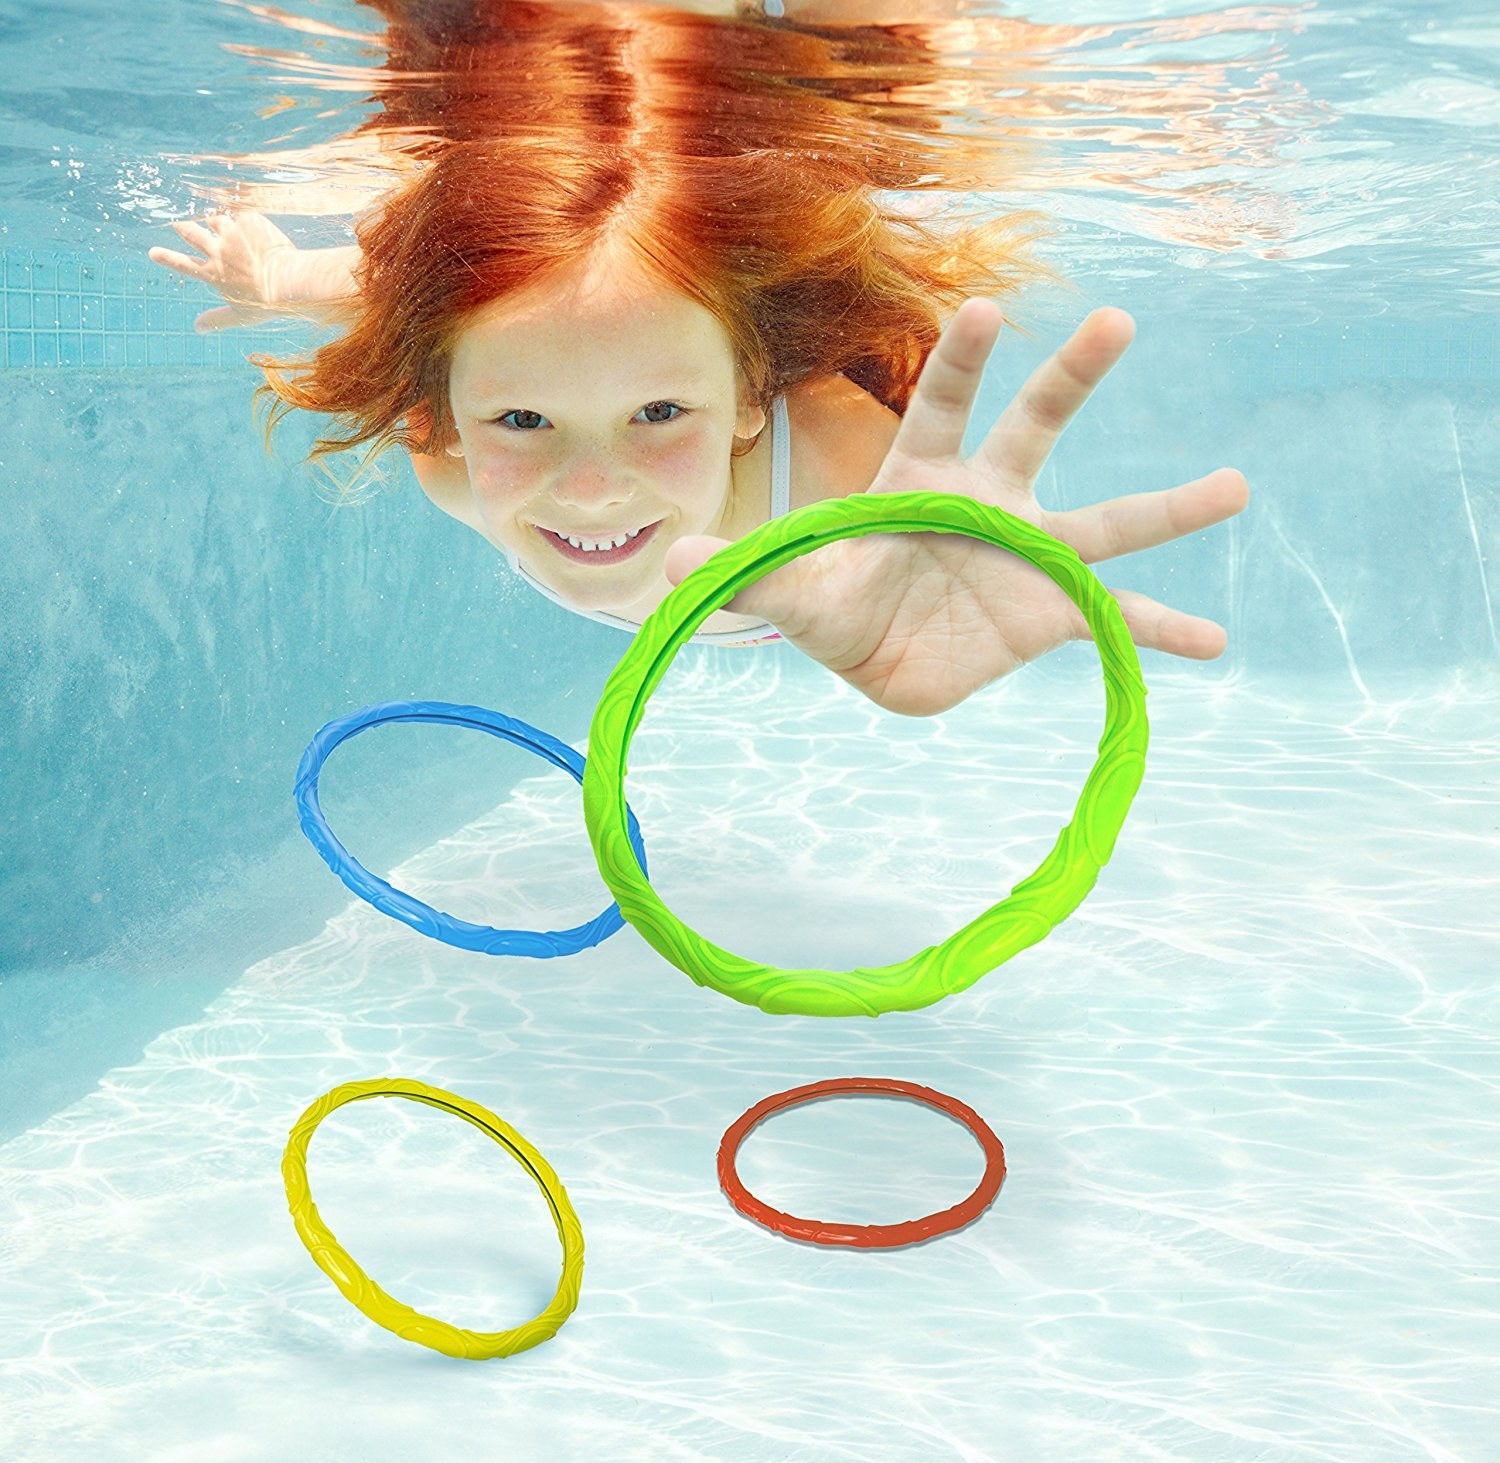 Baby Swim Toddler Arm Bands Float Swimming Ring Pool Infant Kid Children Toy 23a 